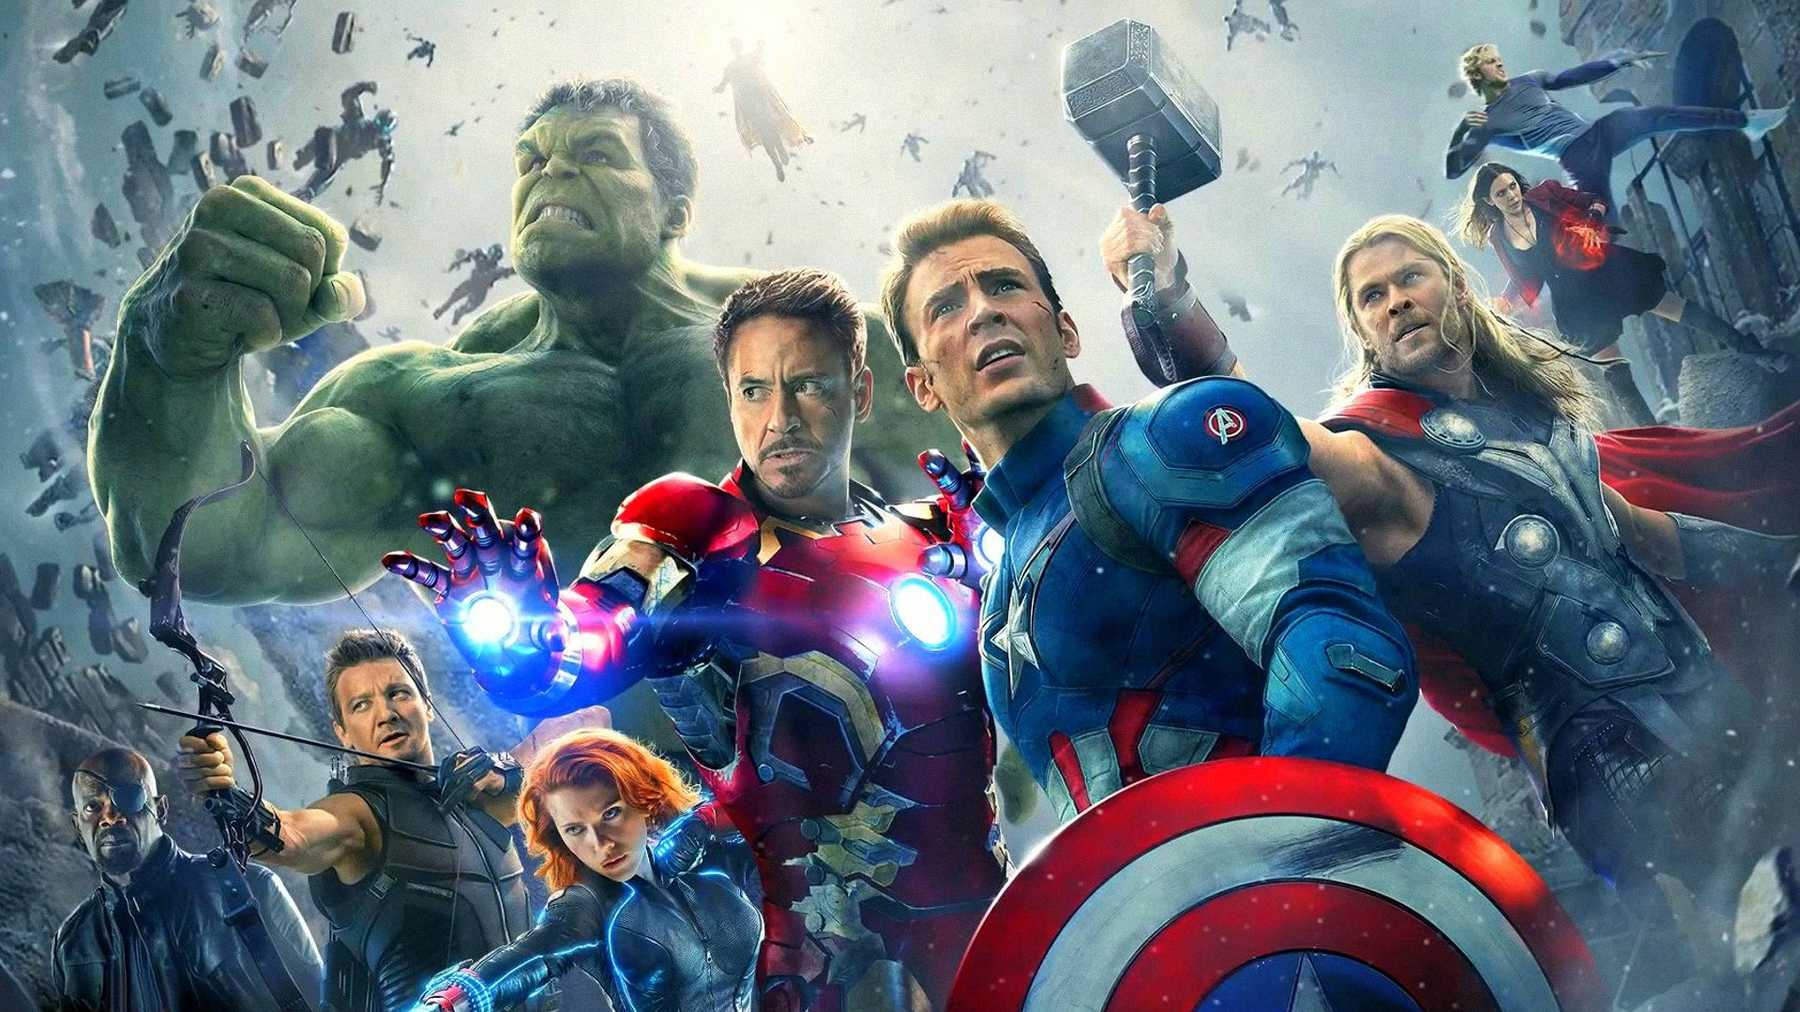 This Avengers: Age of Ultron Quiz Will Reveal How Much MCU Knowledge You Really Have